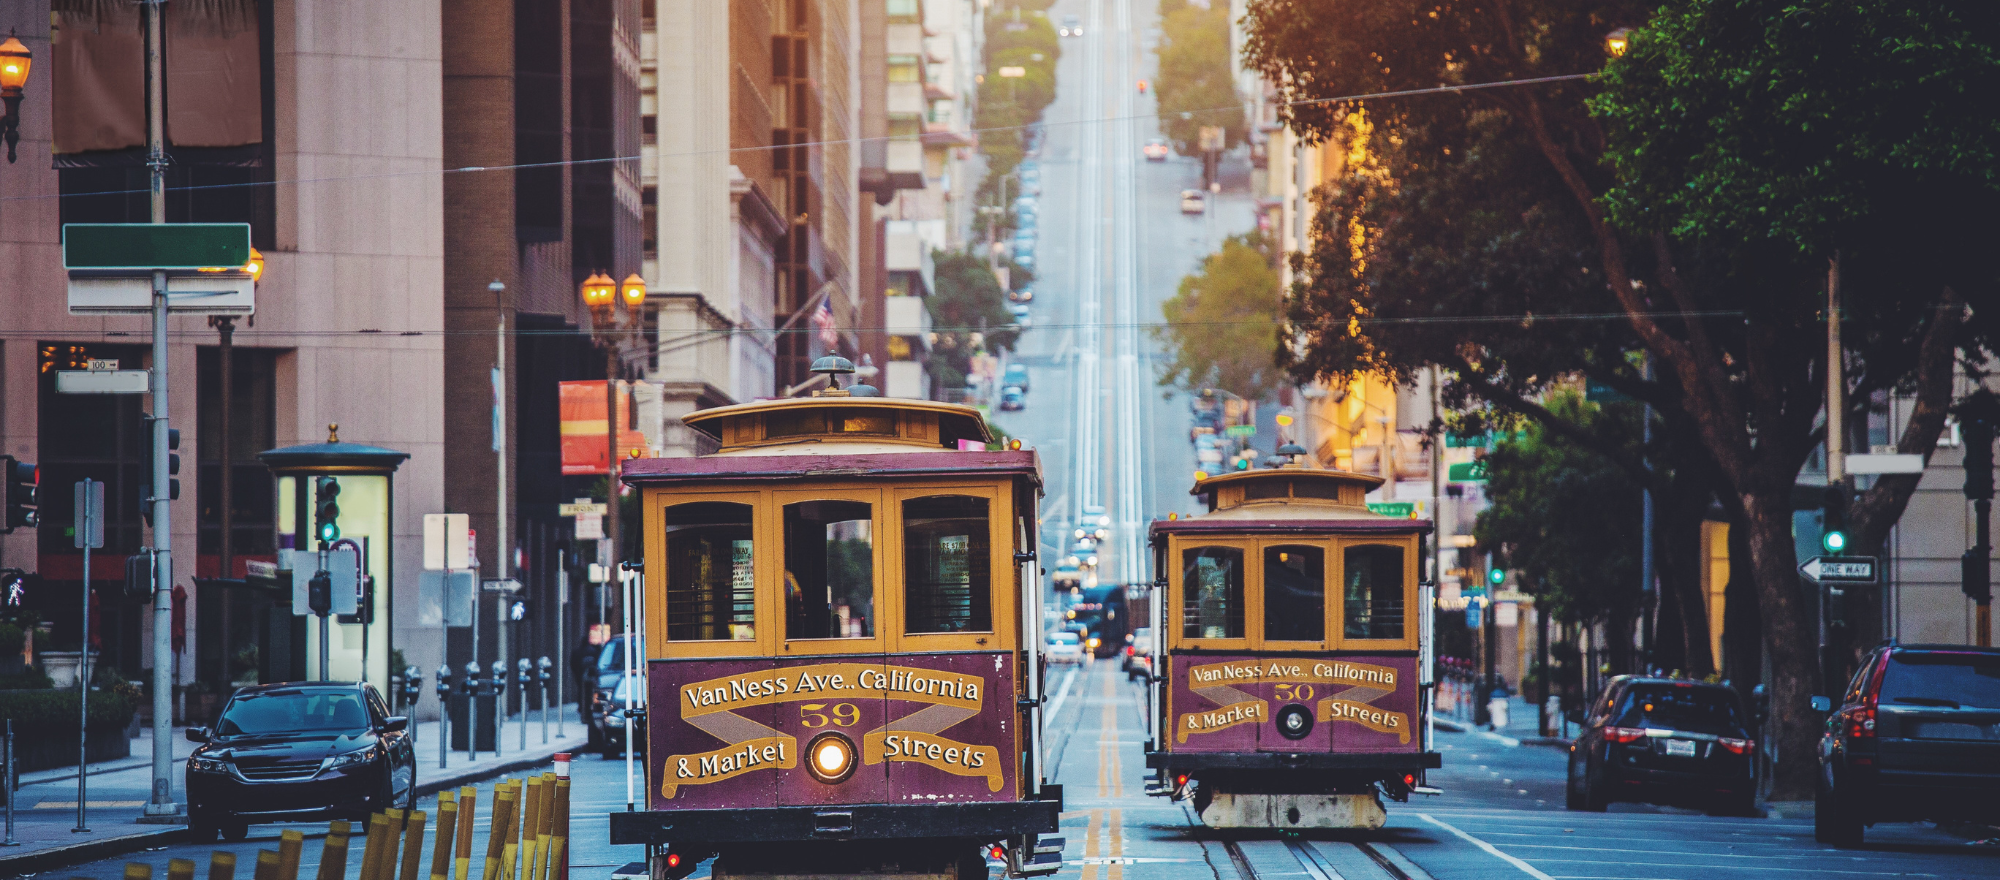 Two San Francisco Cable Car on steep street; Z Hotels San Francisco Weekend Offer: Up to 10% off our Best Available Rates, One 3-Day Cable Car & MUNI Pass, Complimentary Upgrade (based on availability) and Complimentary 2:00pm Late Check Out (based on availability)